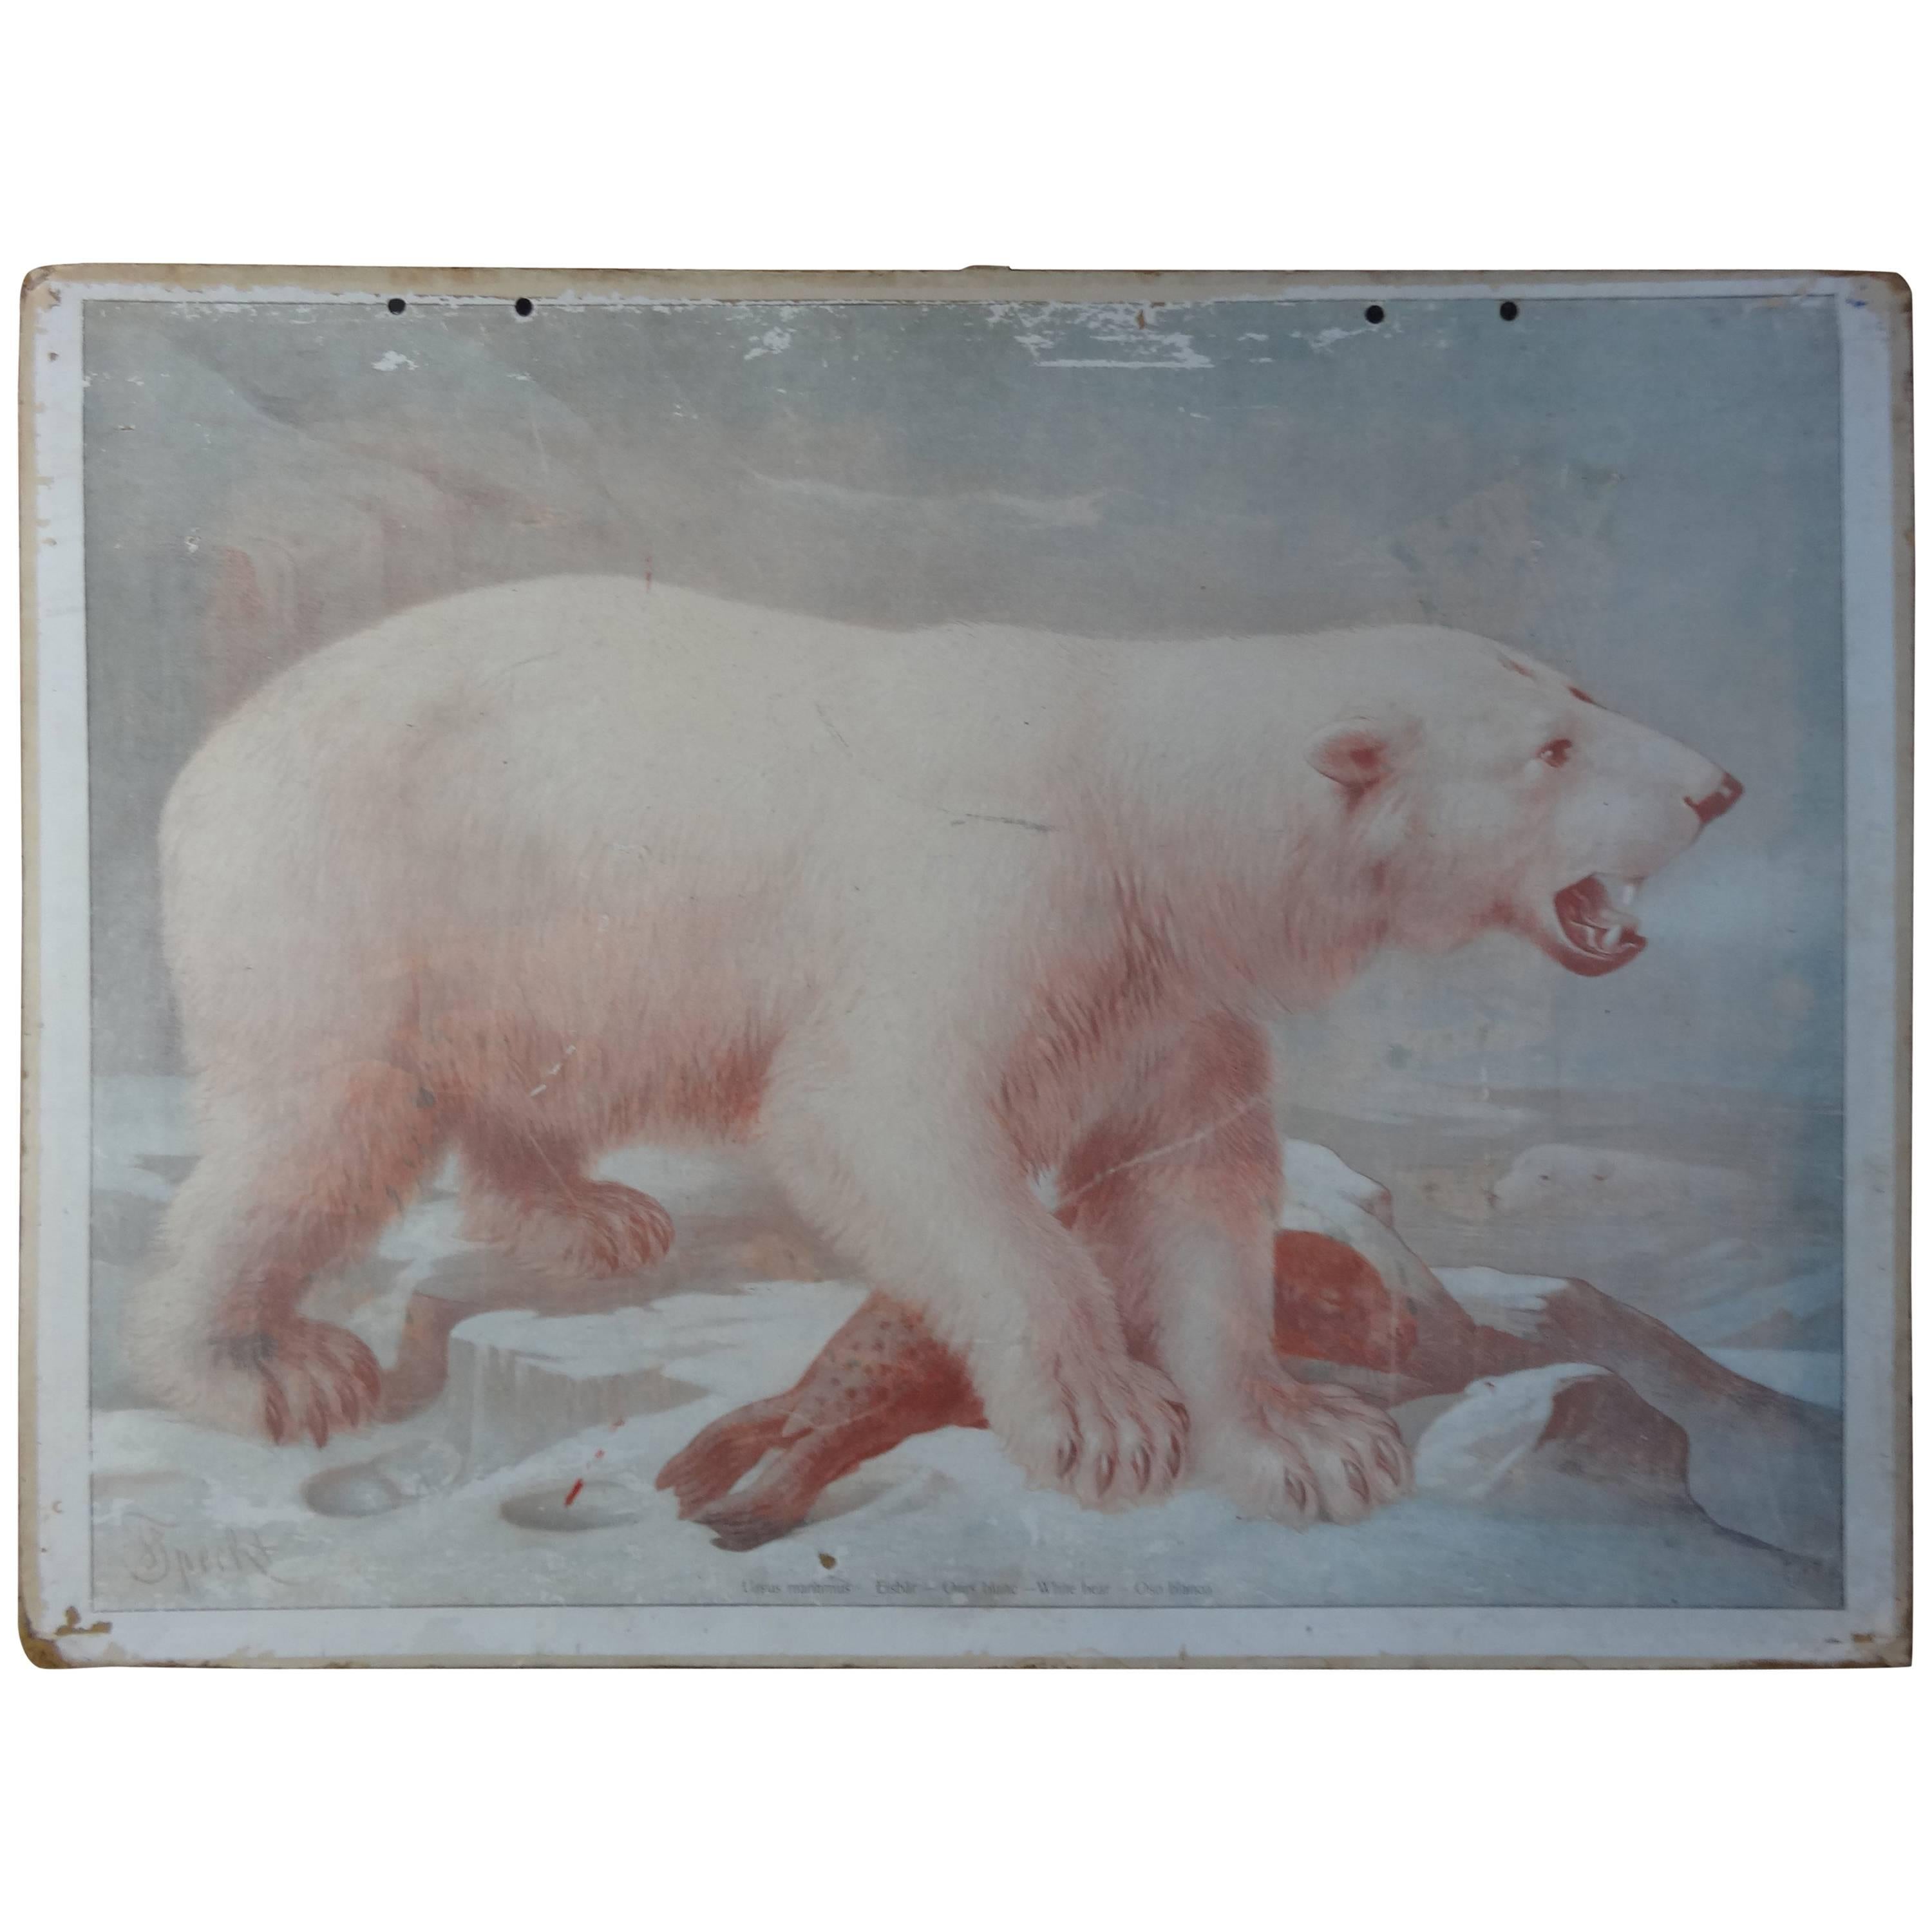 20th Century School Print of Ice Bear and Reindeer 'Double-Sided'